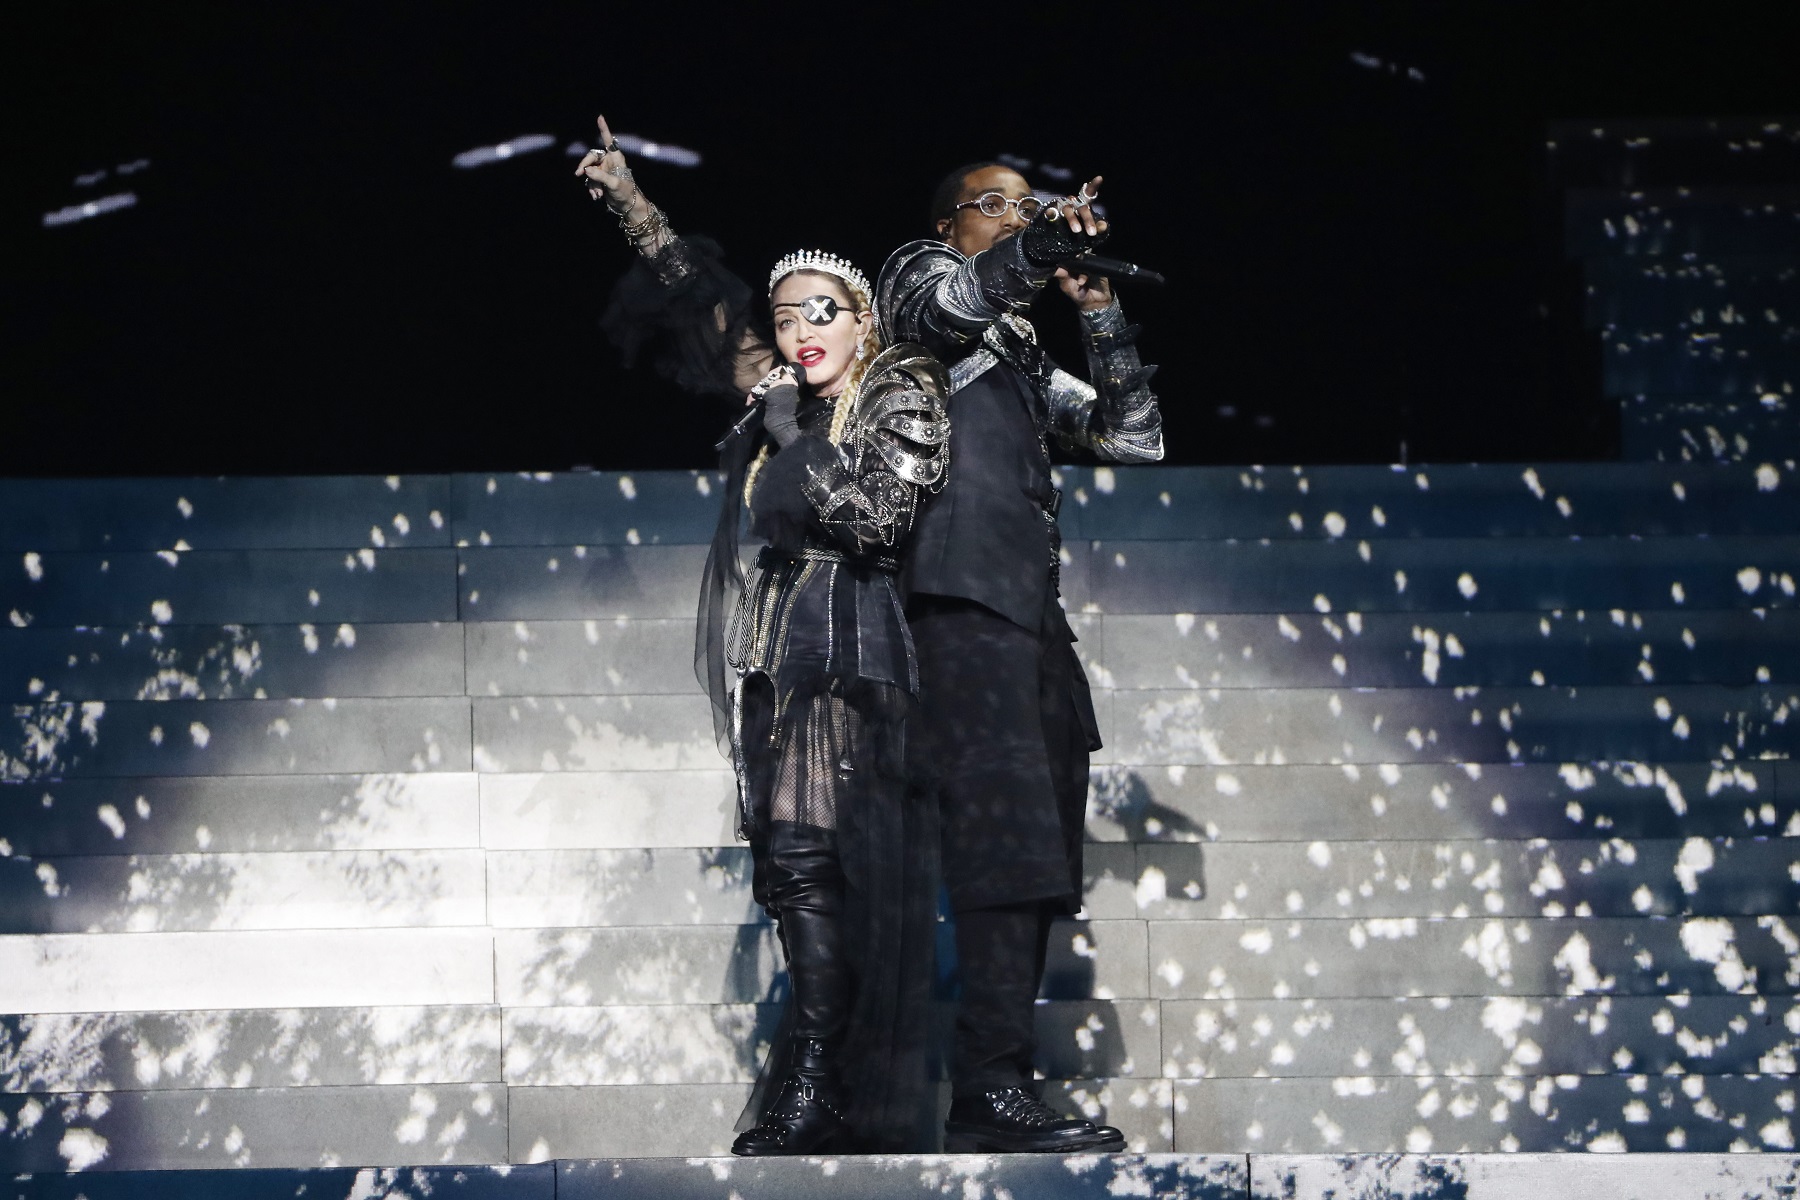 TEL AVIV, ISRAEL - MAY 18: Madonna and Quavo, perform live on stage after the 64th annual Eurovision Song Contest held at Tel Aviv Fairgrounds on May 18, 2019 in Tel Aviv, Israel. (Photo by Michael Campanella/Getty Images)